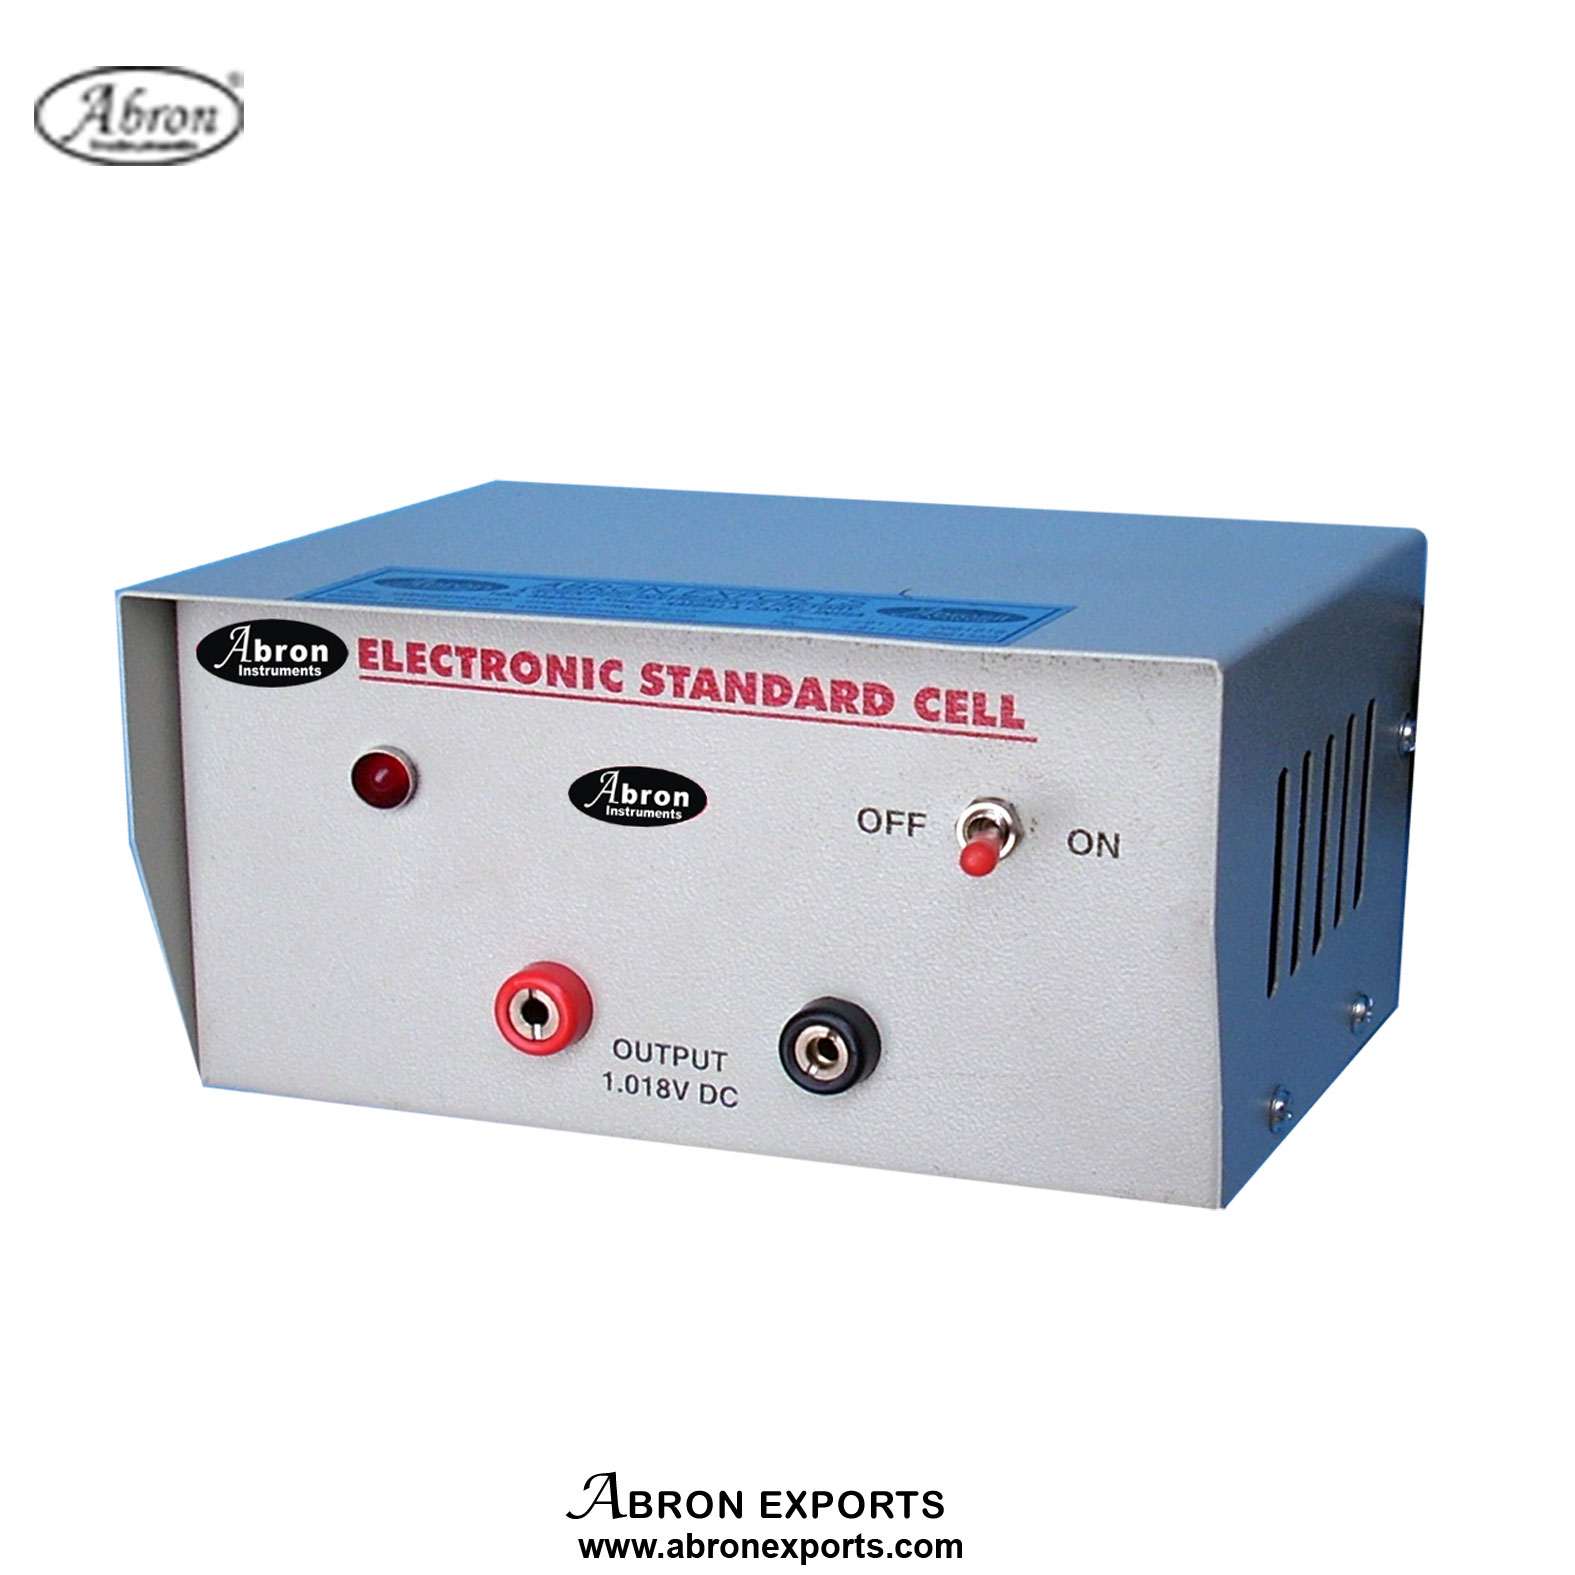 Standard Cell Electronic output 1.0184V DC  with terminals input 220v AE-1393A  or AP-925A